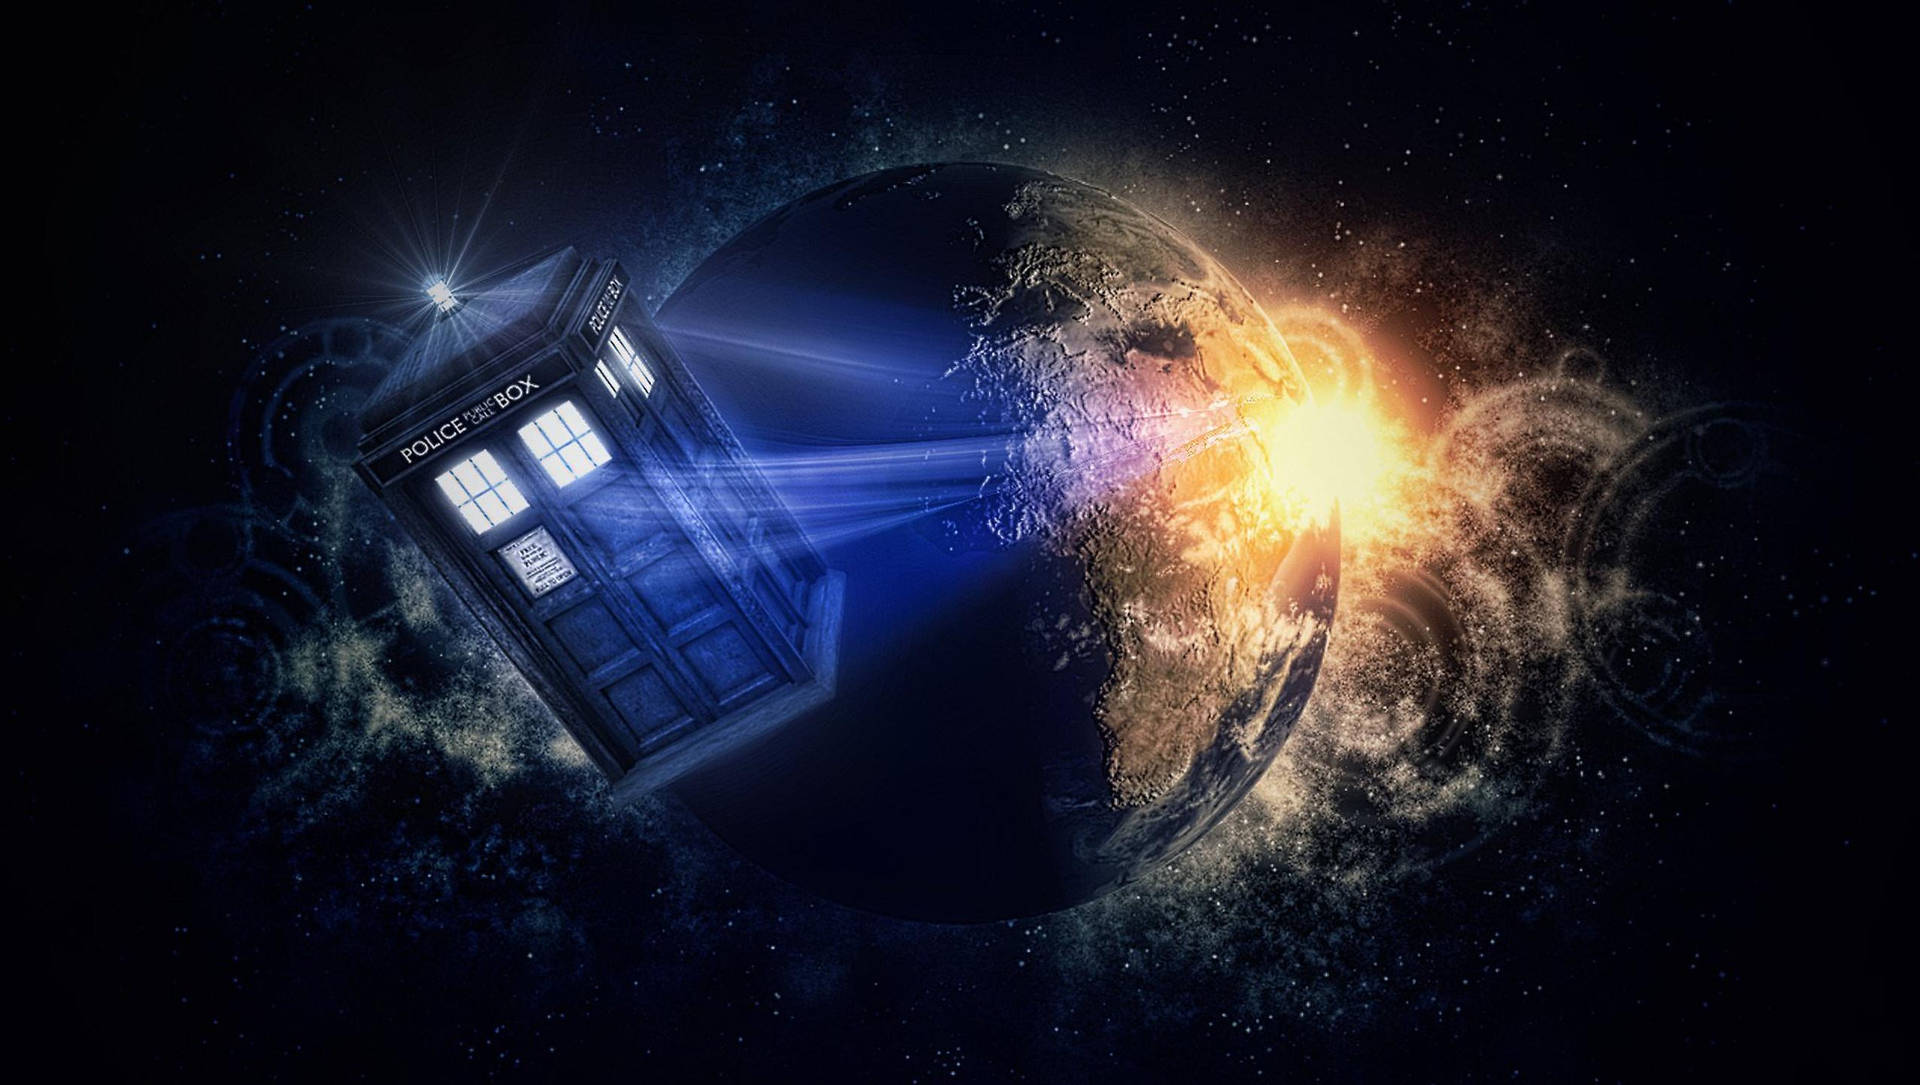 The TARDIS - Traveling through space and time with the Doctor! Wallpaper